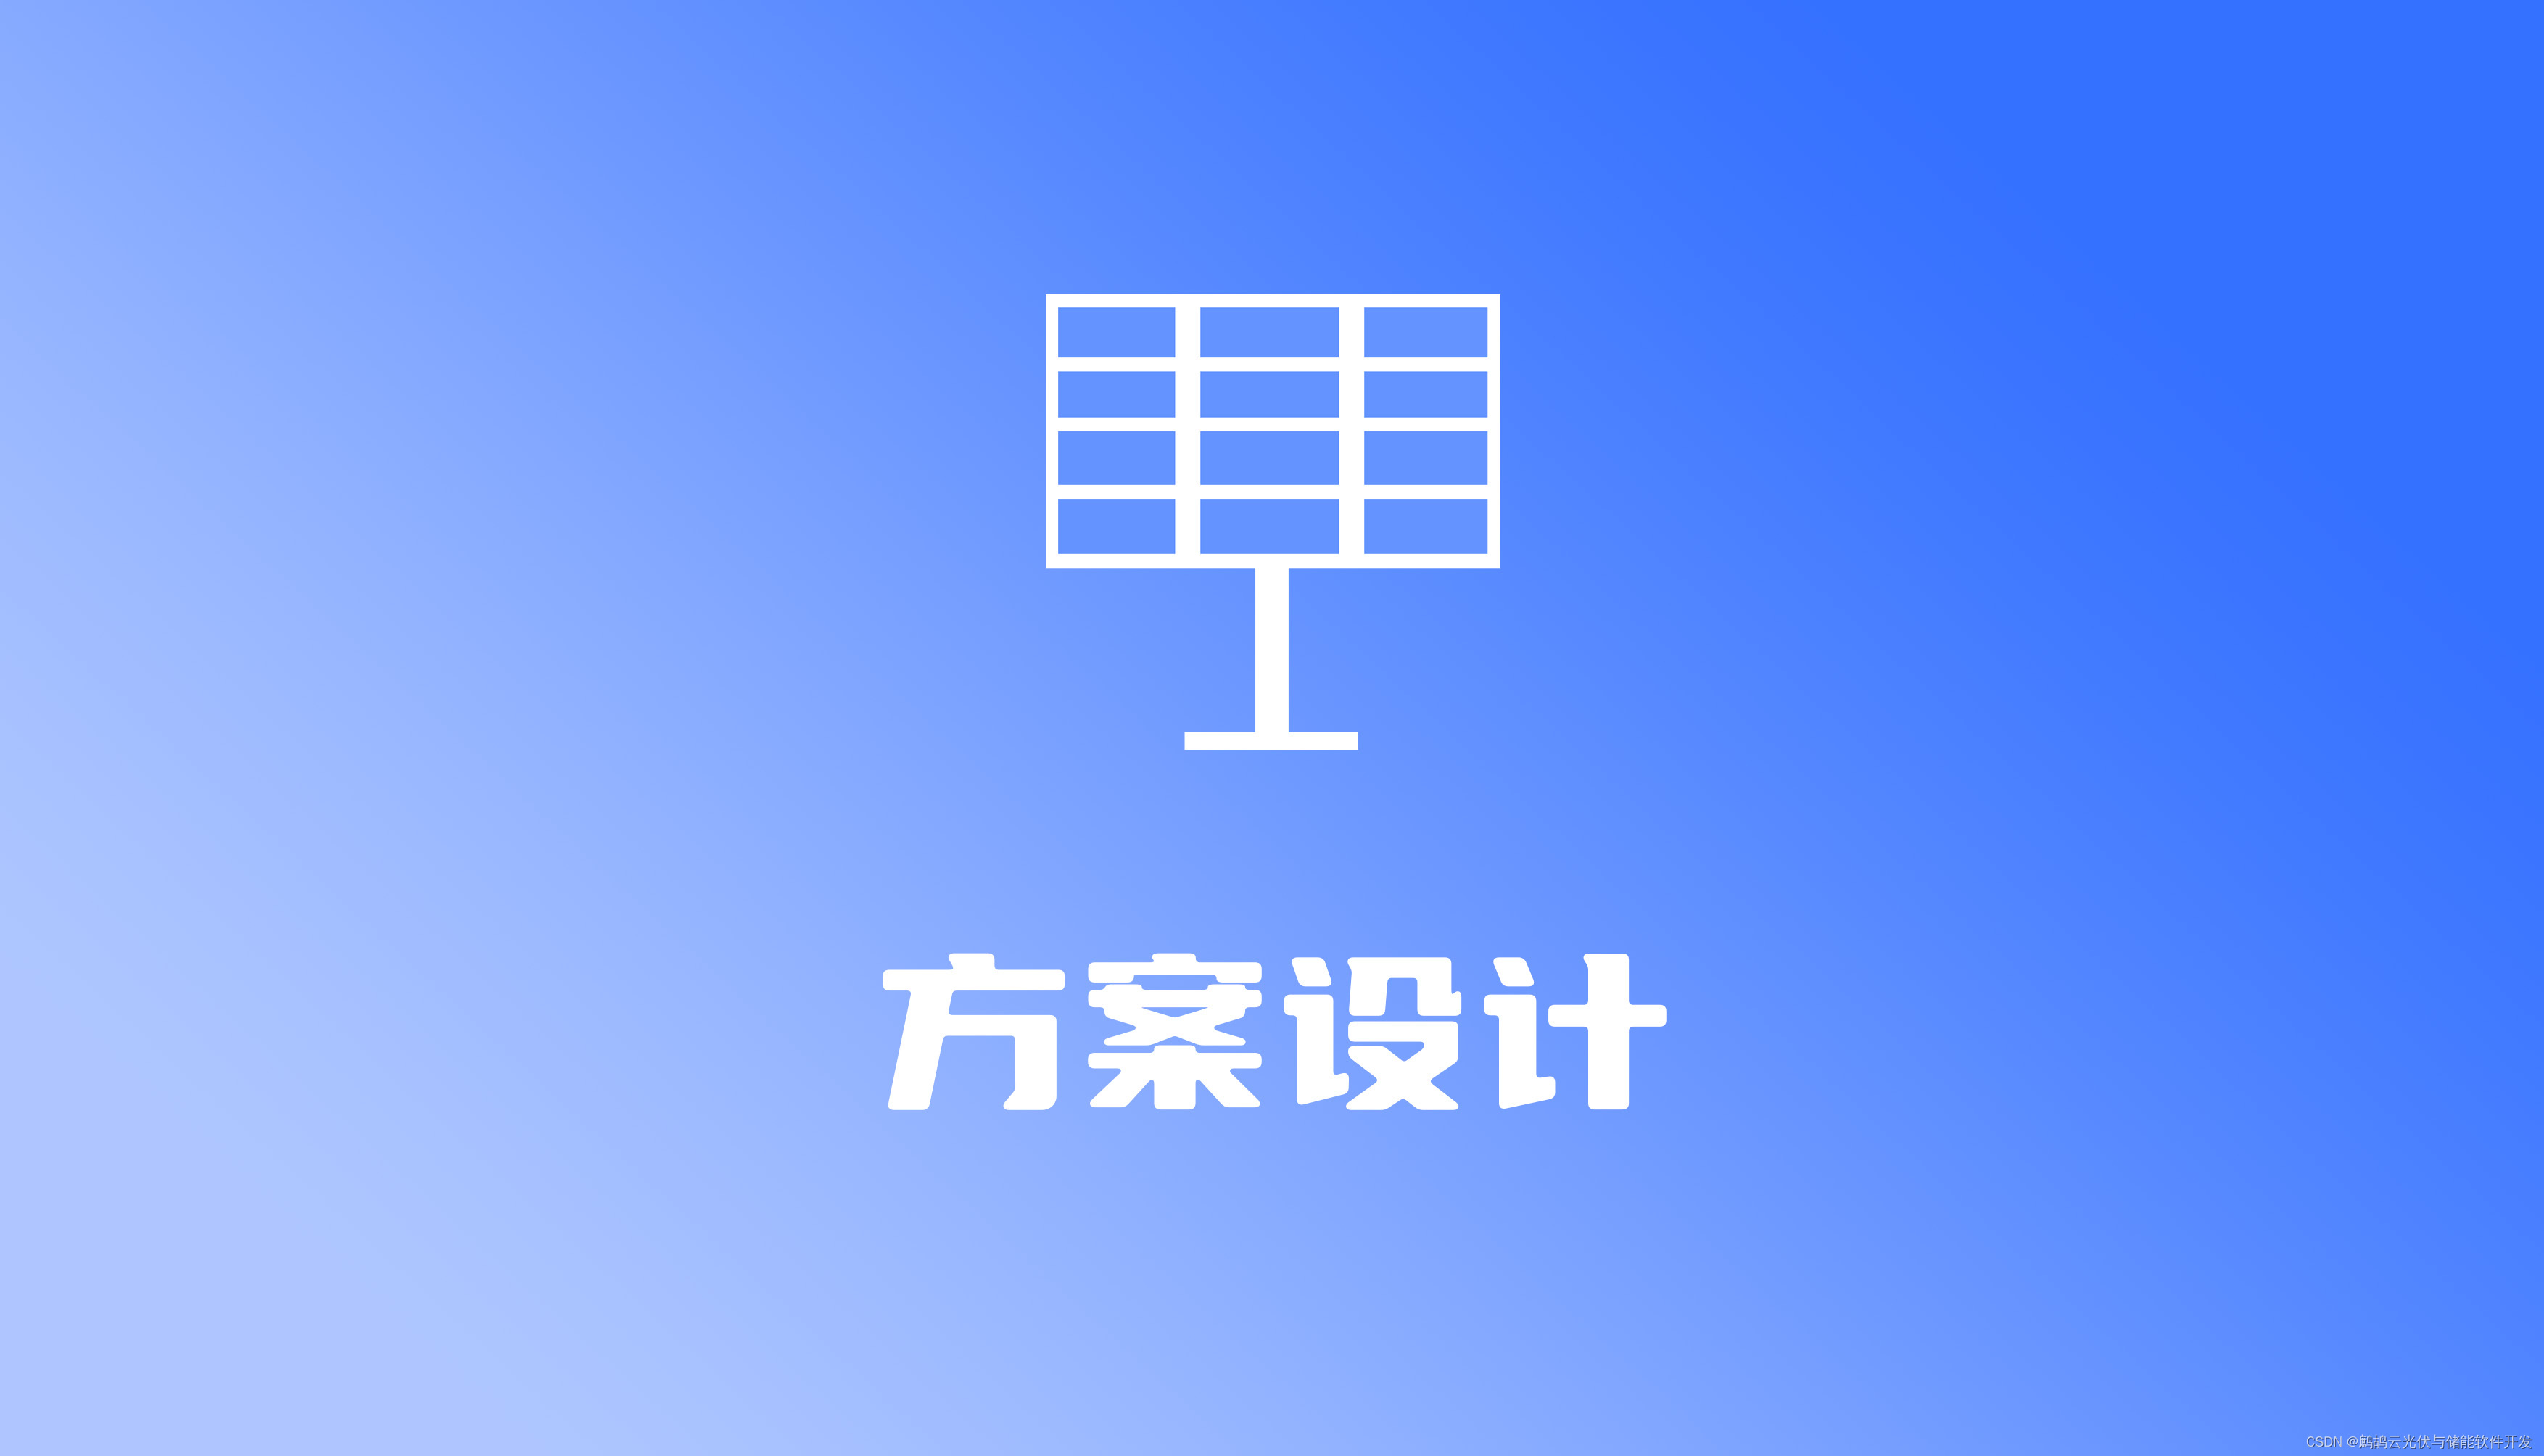 <span style='color:red;'>光</span><span style='color:red;'>伏</span><span style='color:red;'>系统</span>方案<span style='color:red;'>设计</span><span style='color:red;'>的</span>注意点